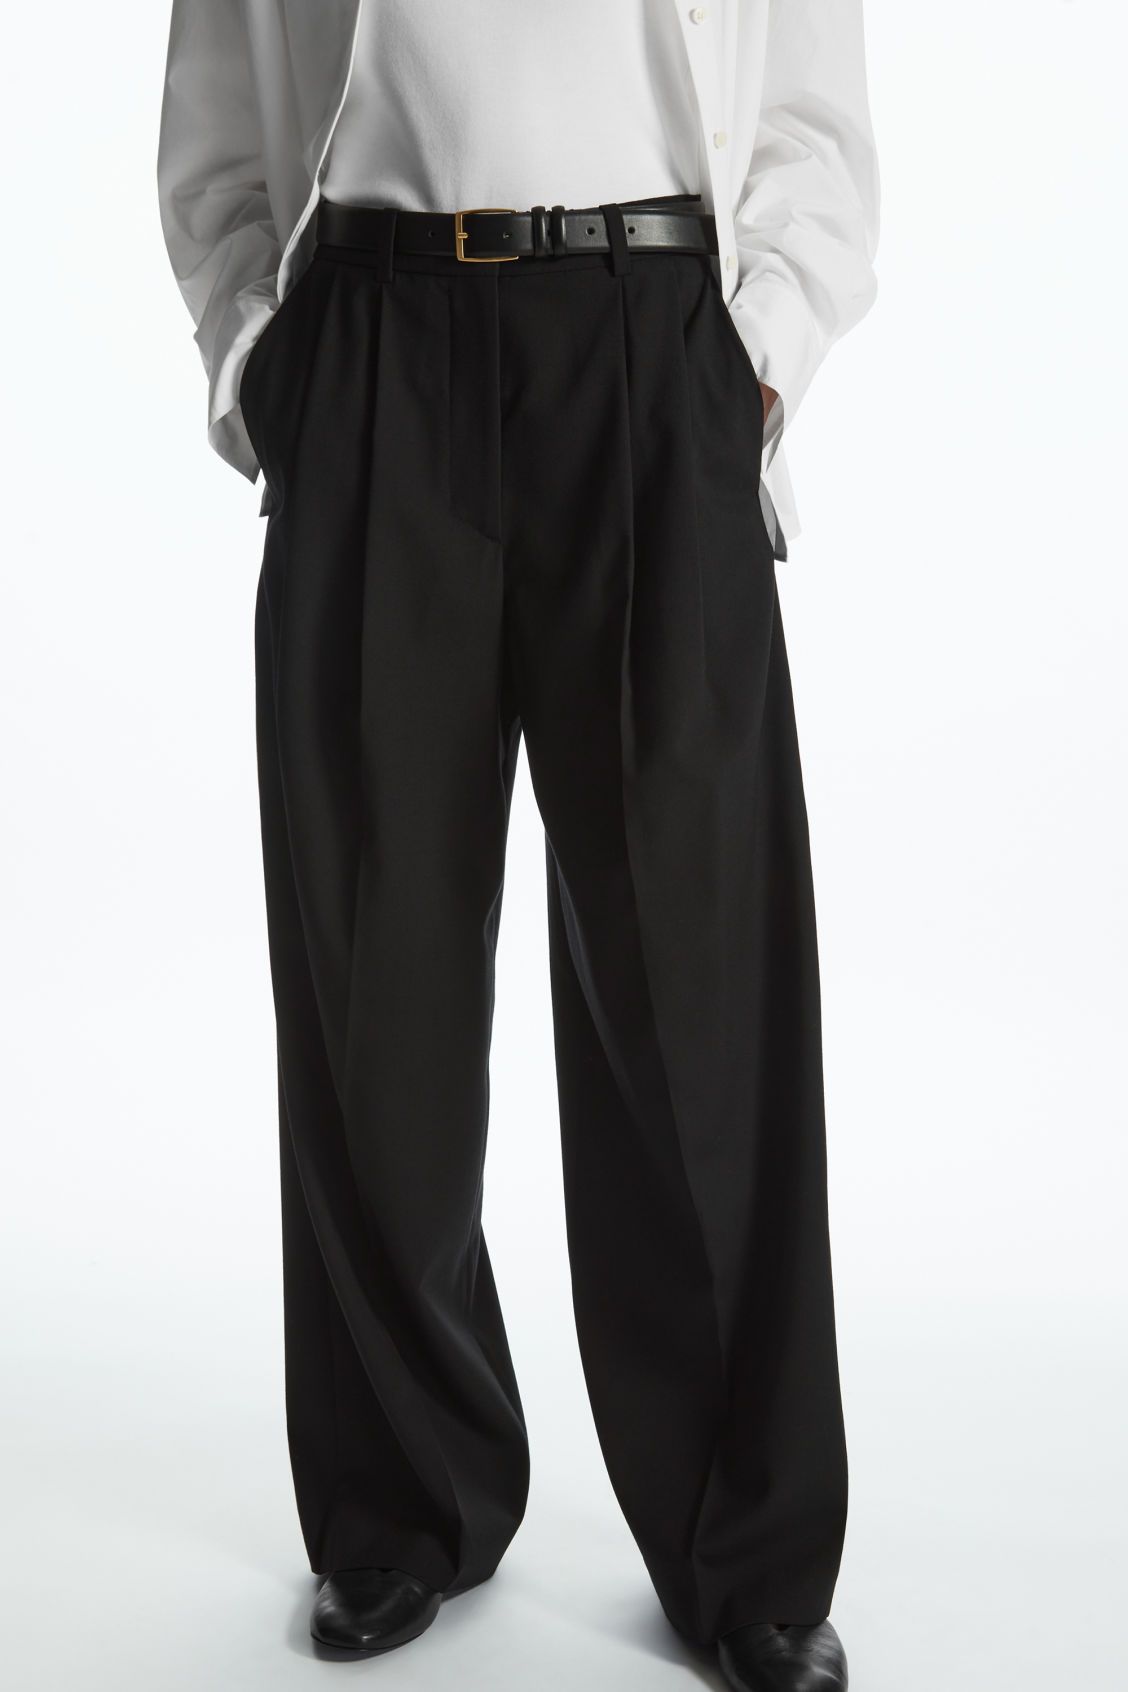 Black Belted High Waist Trousers | New Look